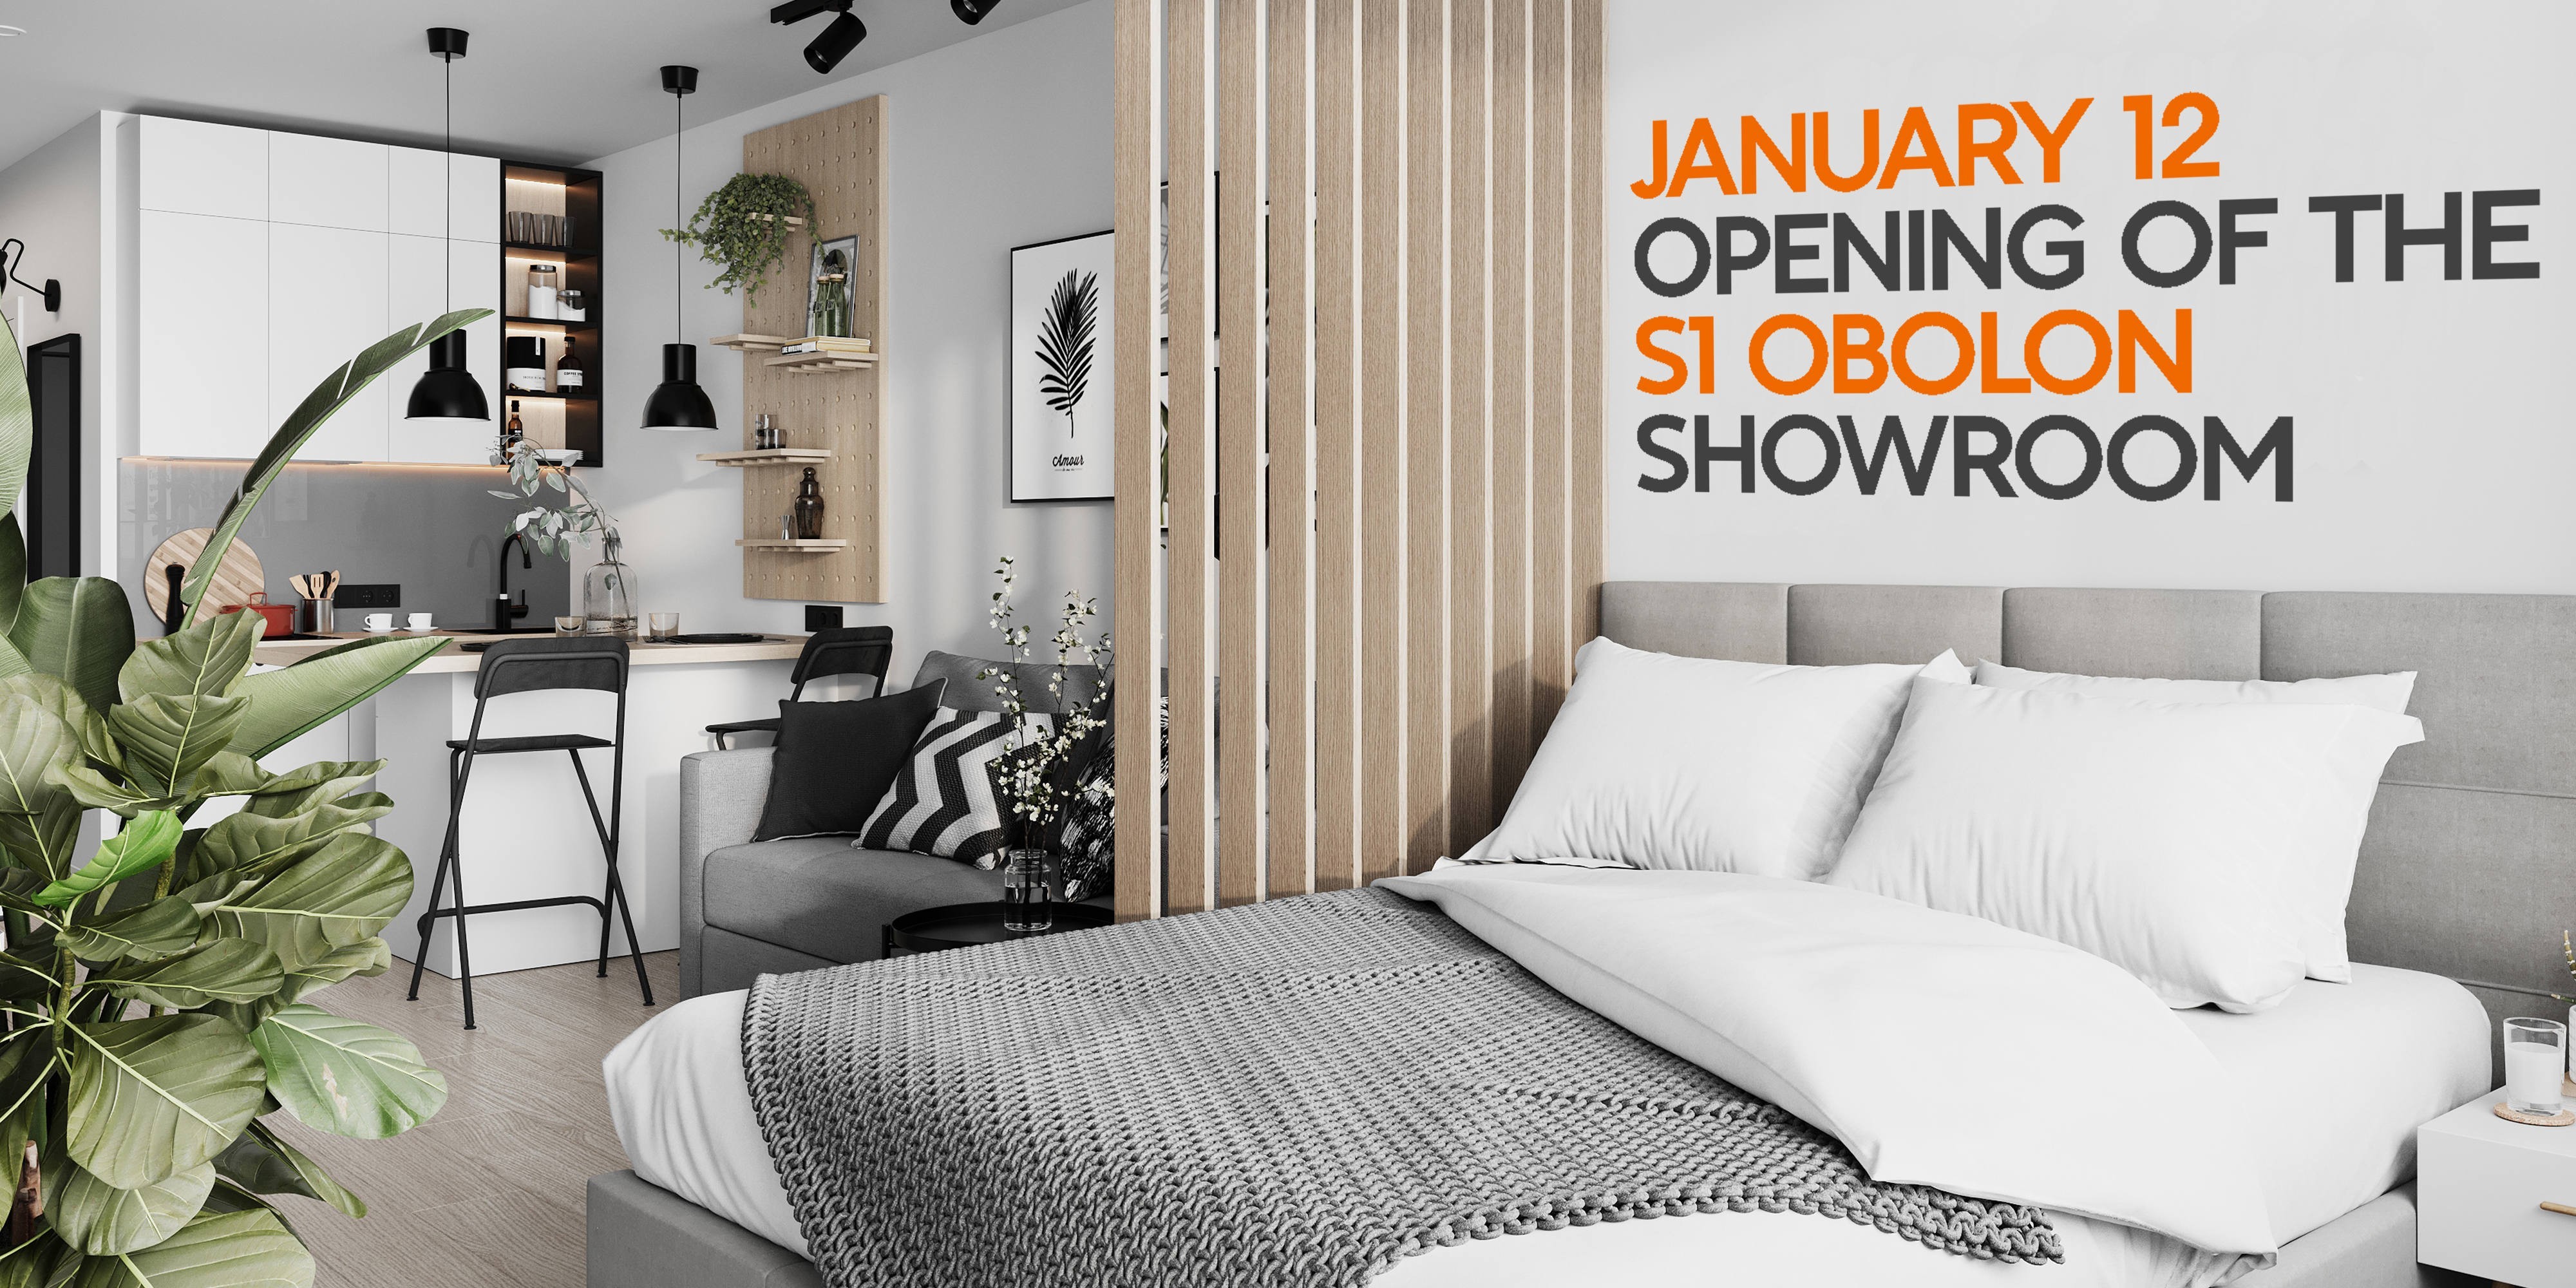 We invite you to the showroom opening and gift drawing on January 12!